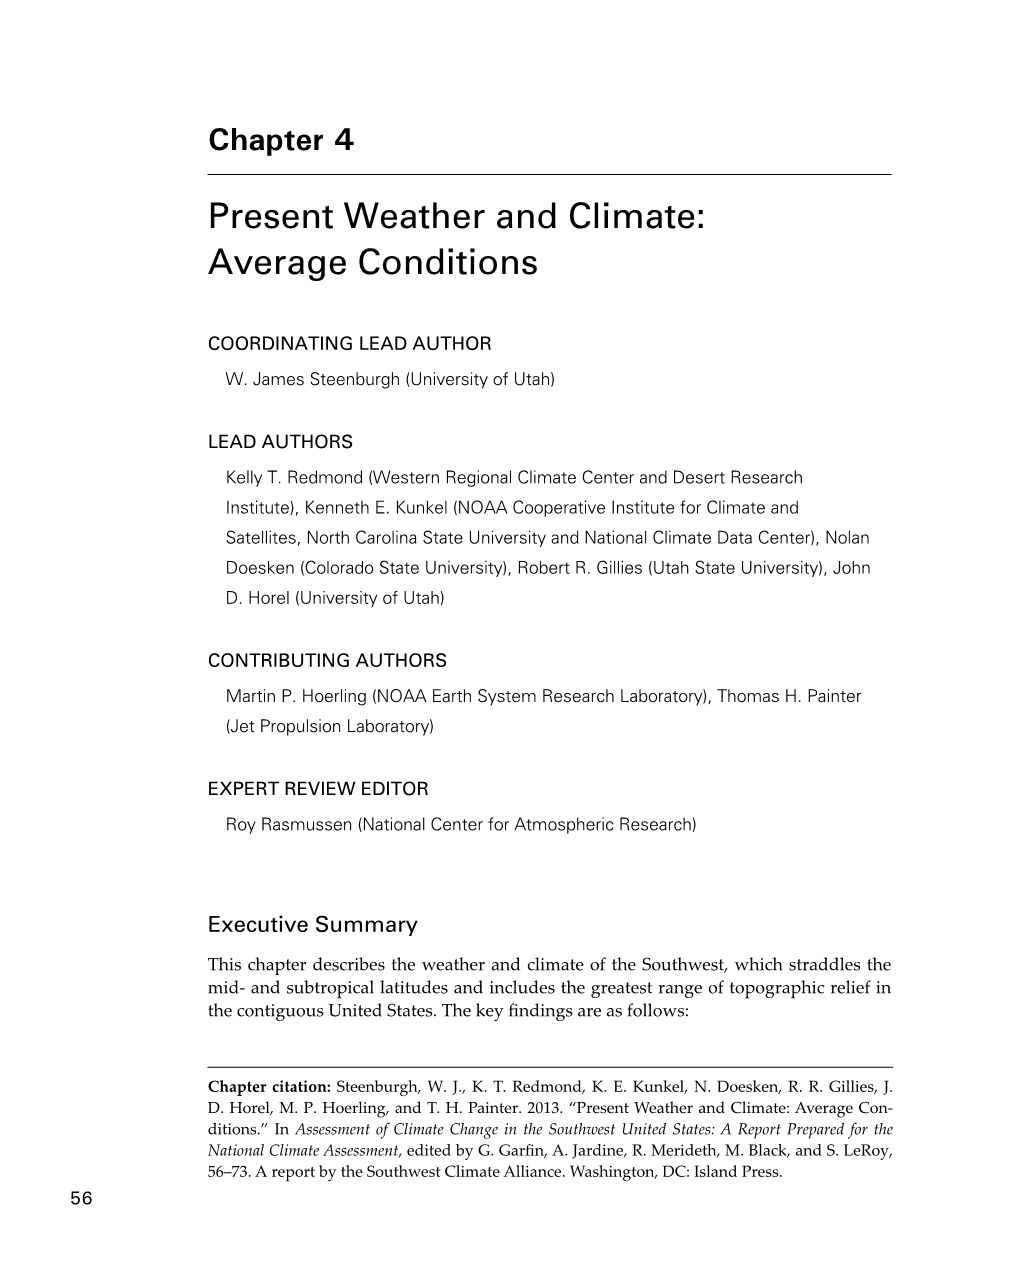 Present Weather and Climate: Average Conditions